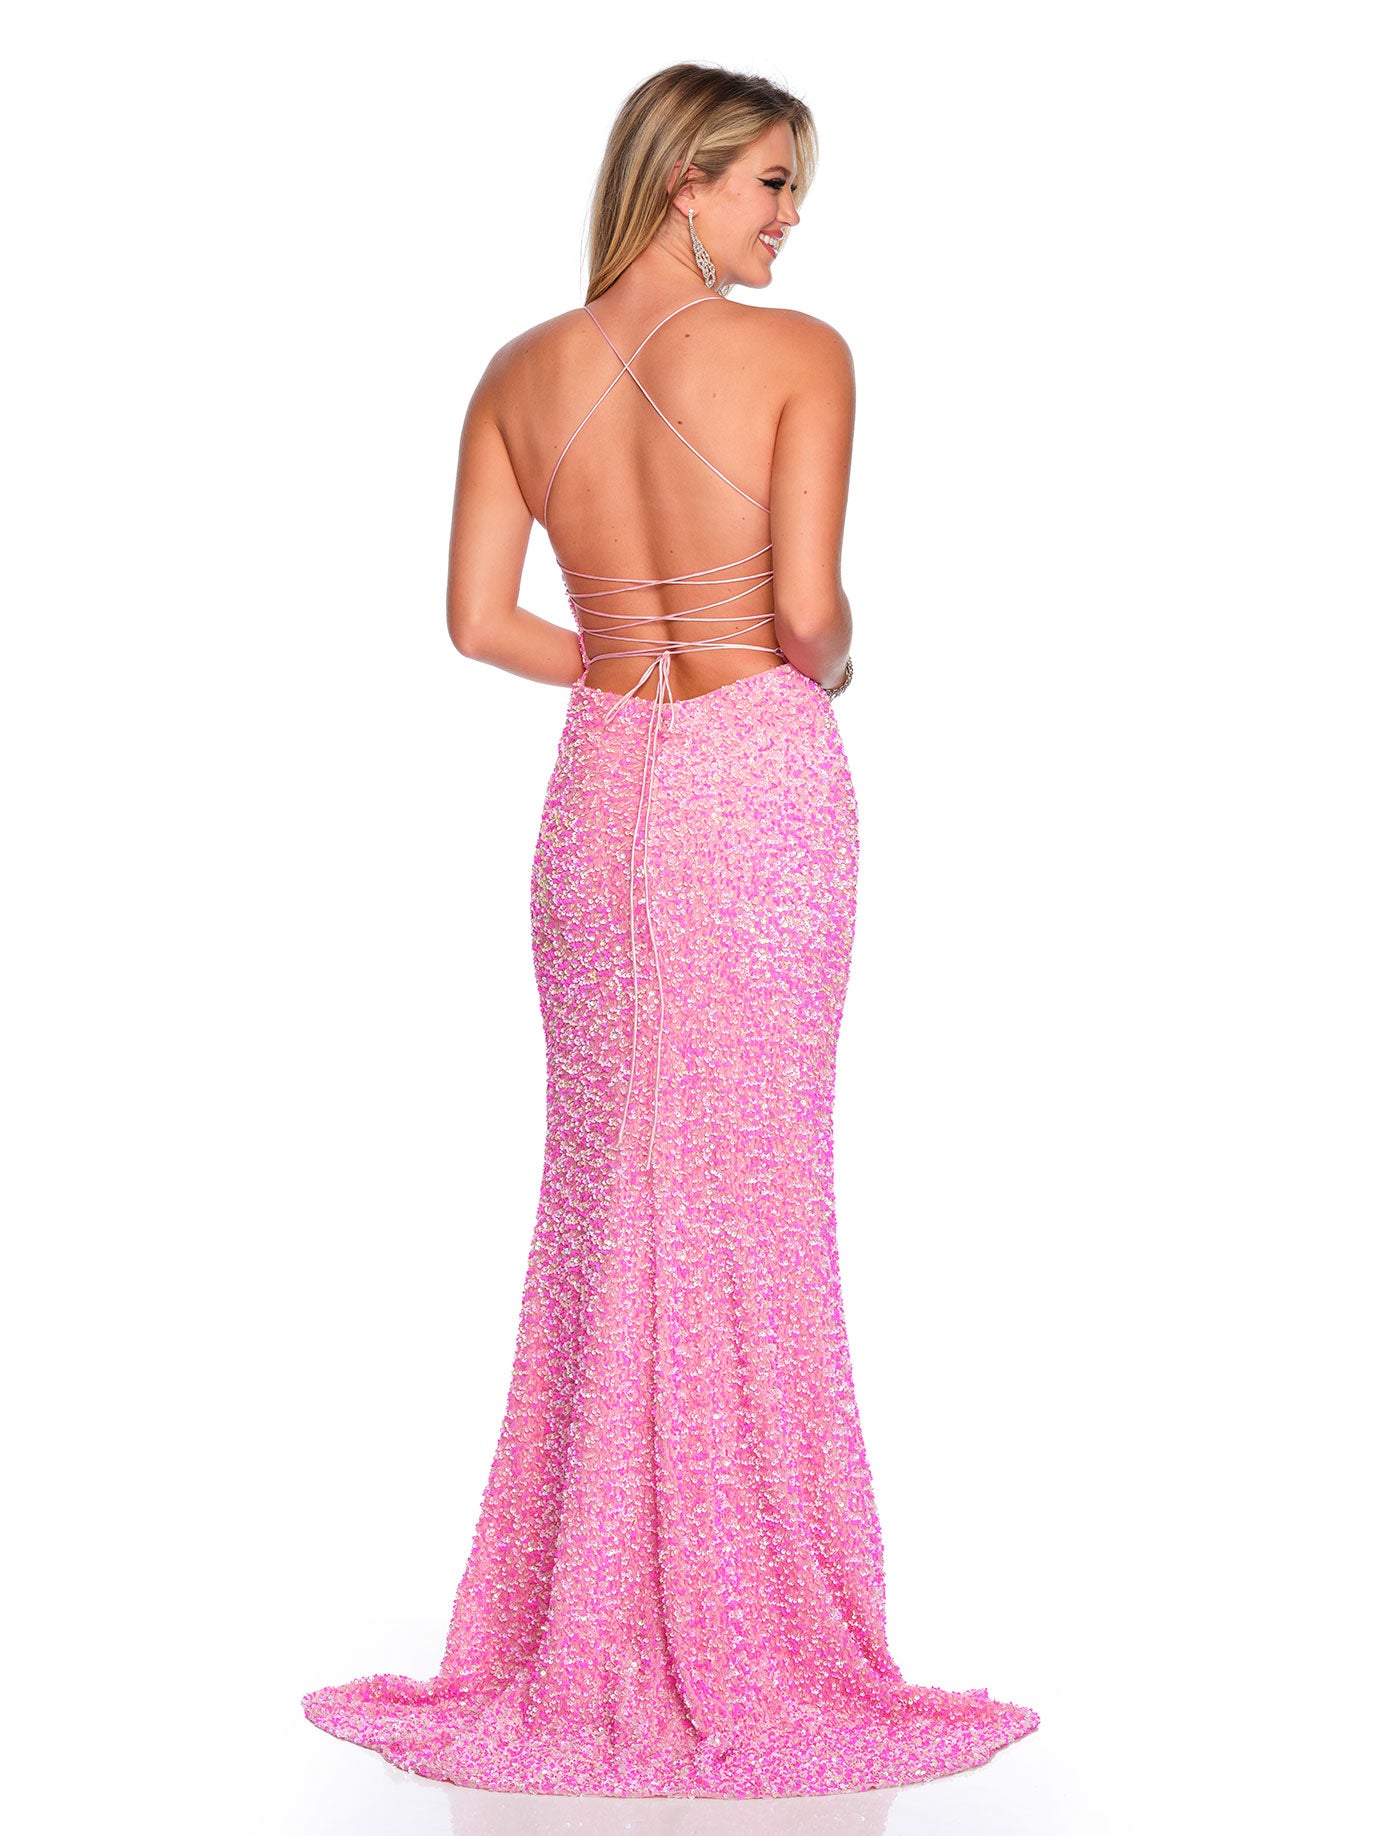 PINK & WHITE SEQUINS GOWN